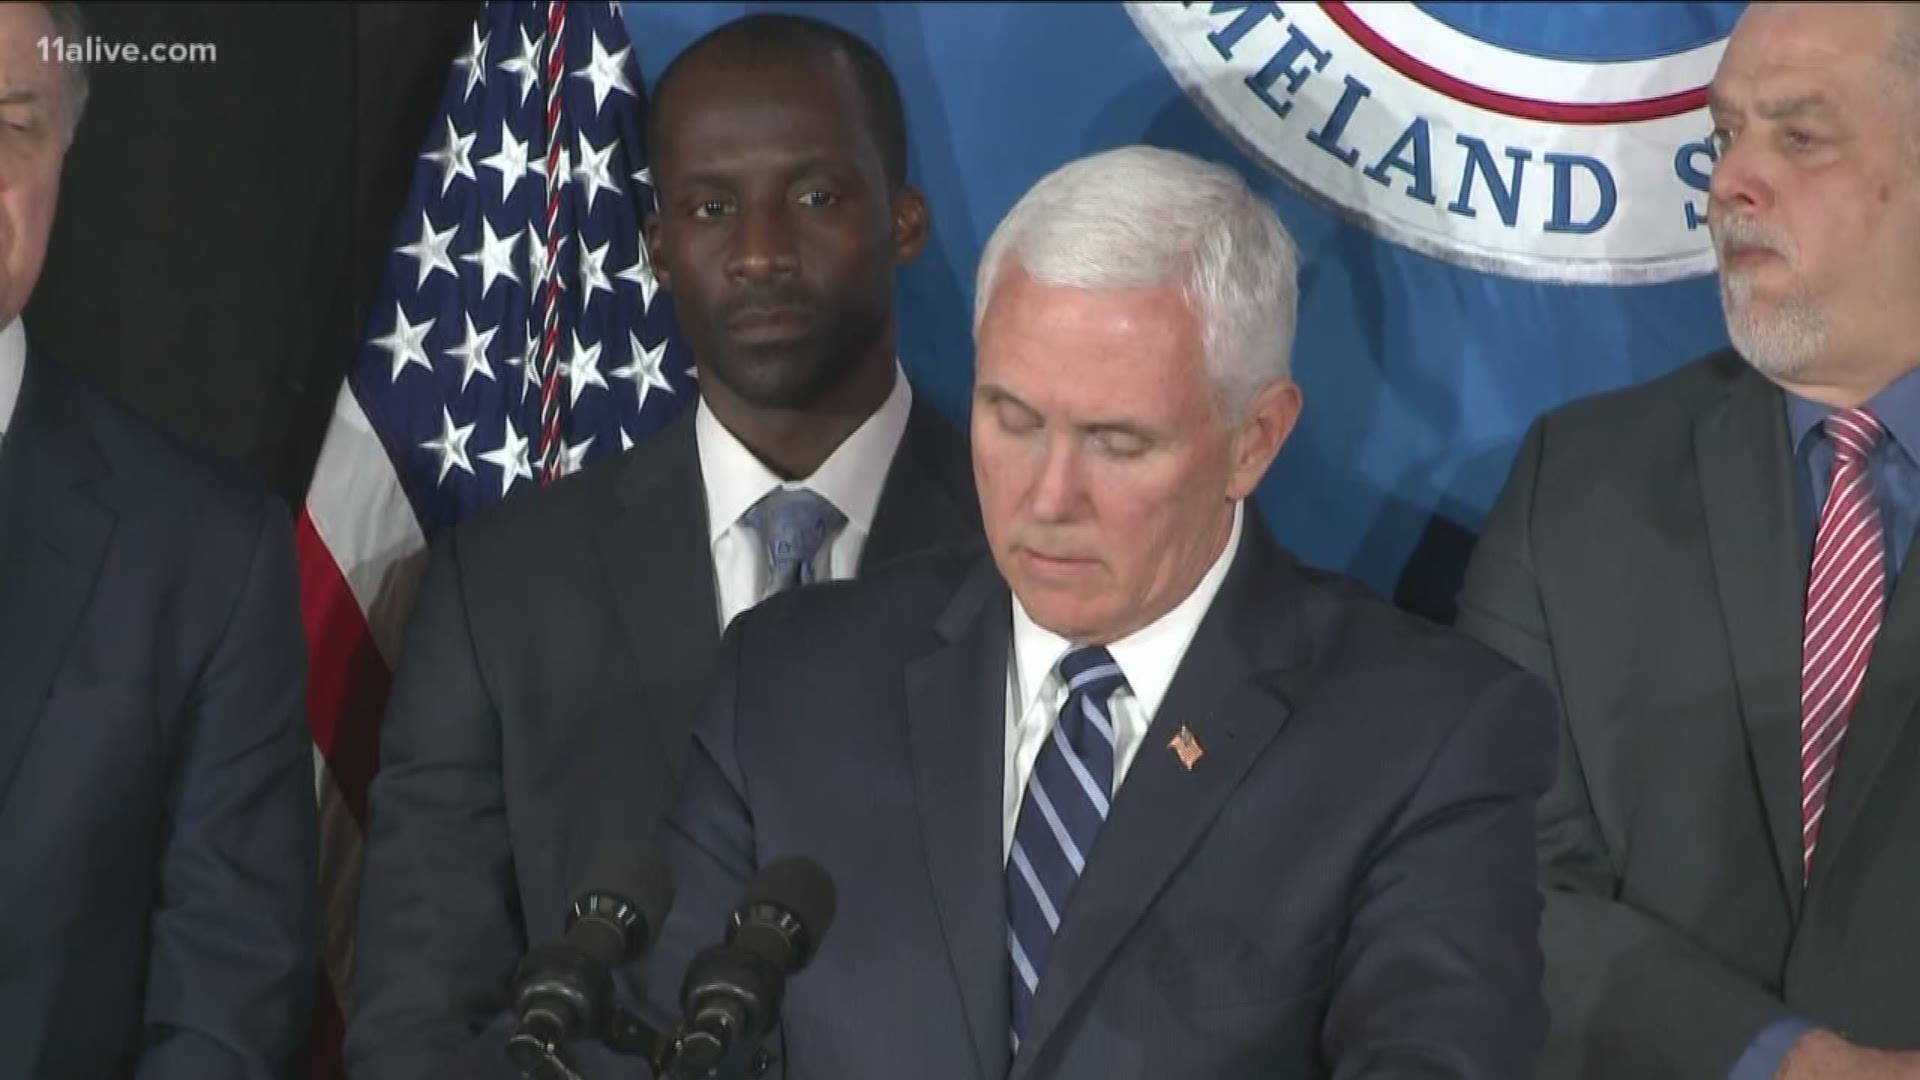 The vice president was in town to thank the men and women of the Atlanta field office, but not before taking parting shots at the city government's split with ICE.